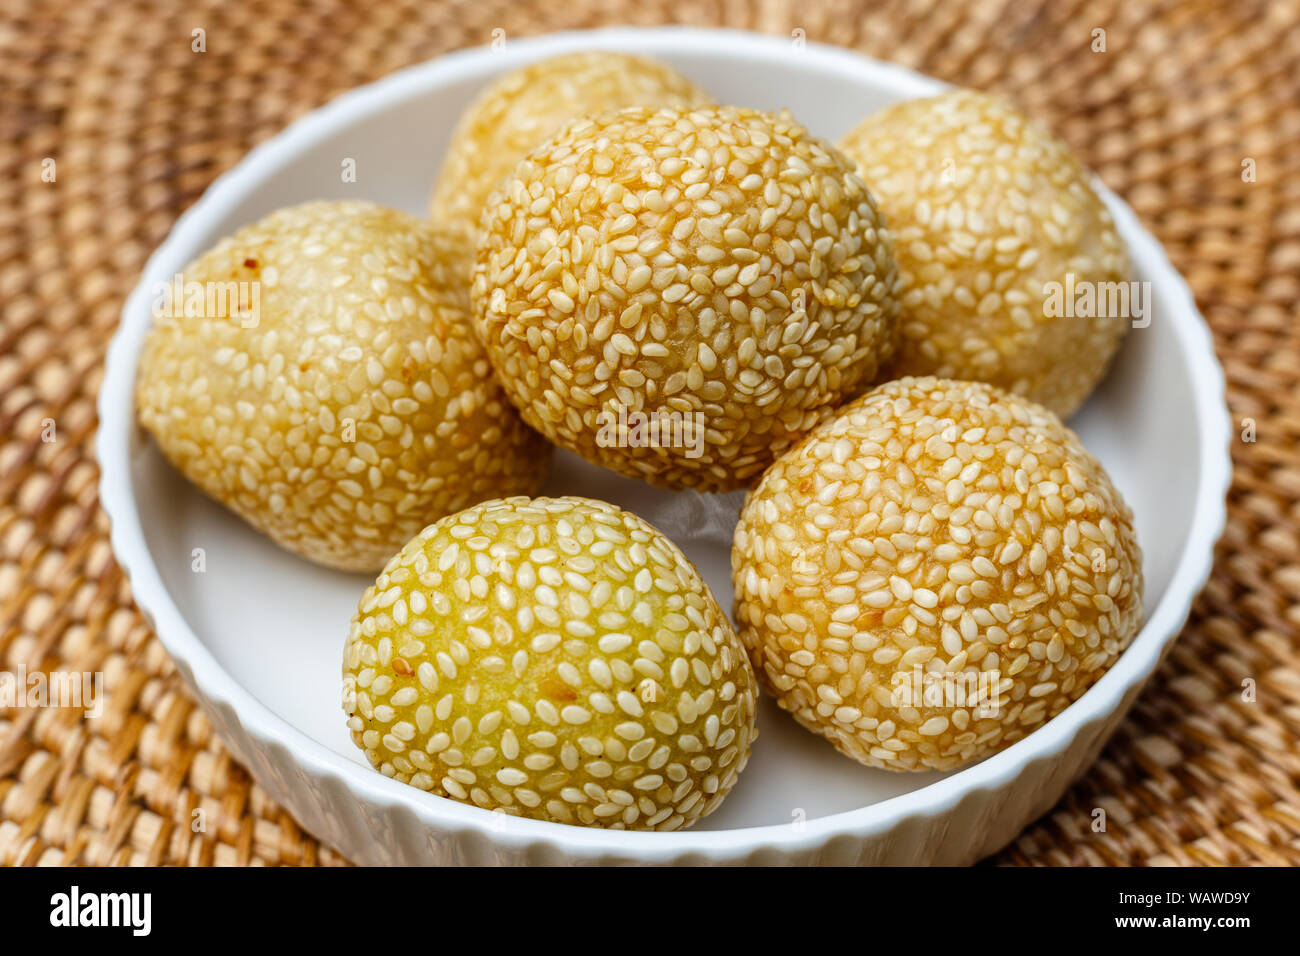 Onde-onde (ondhe-ondhe), rice flower balls coated in sesame seeds with green bean powder or black sticky rice inside. Traditional Indonesian dessert. Stock Photo